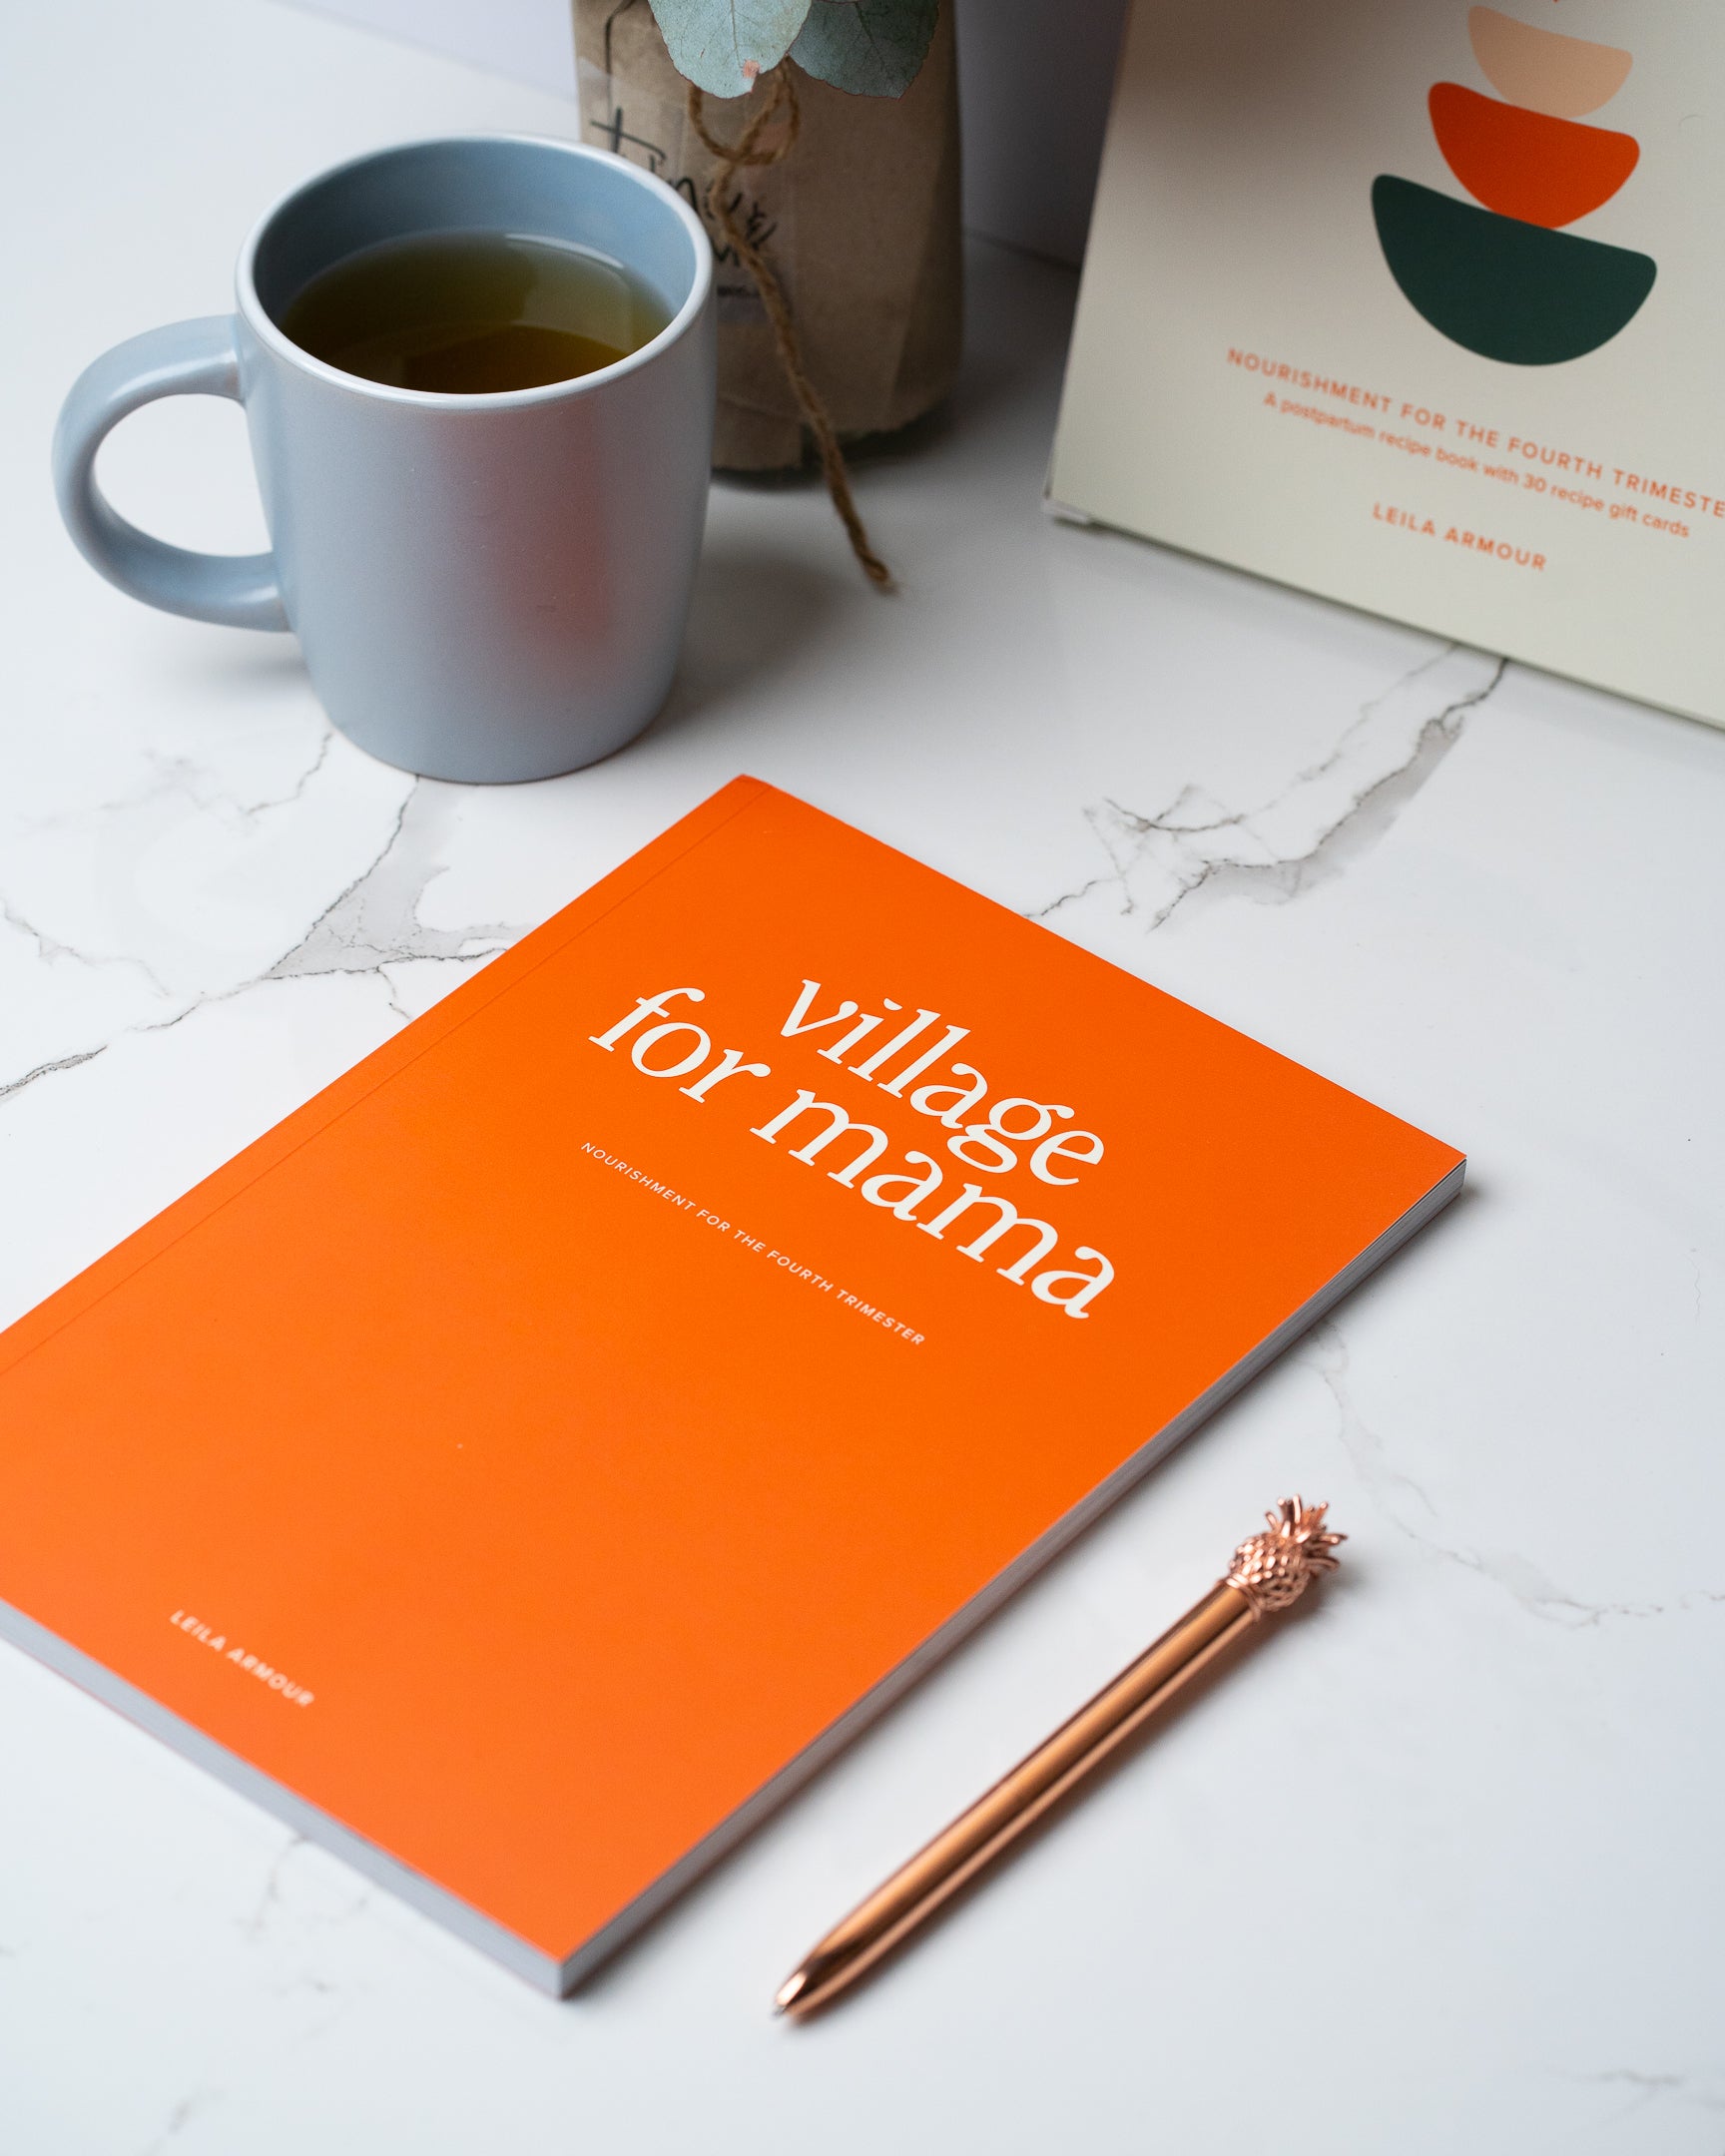 Postpartum Recipe Book with Gift Cards by Village for Mama edition 1